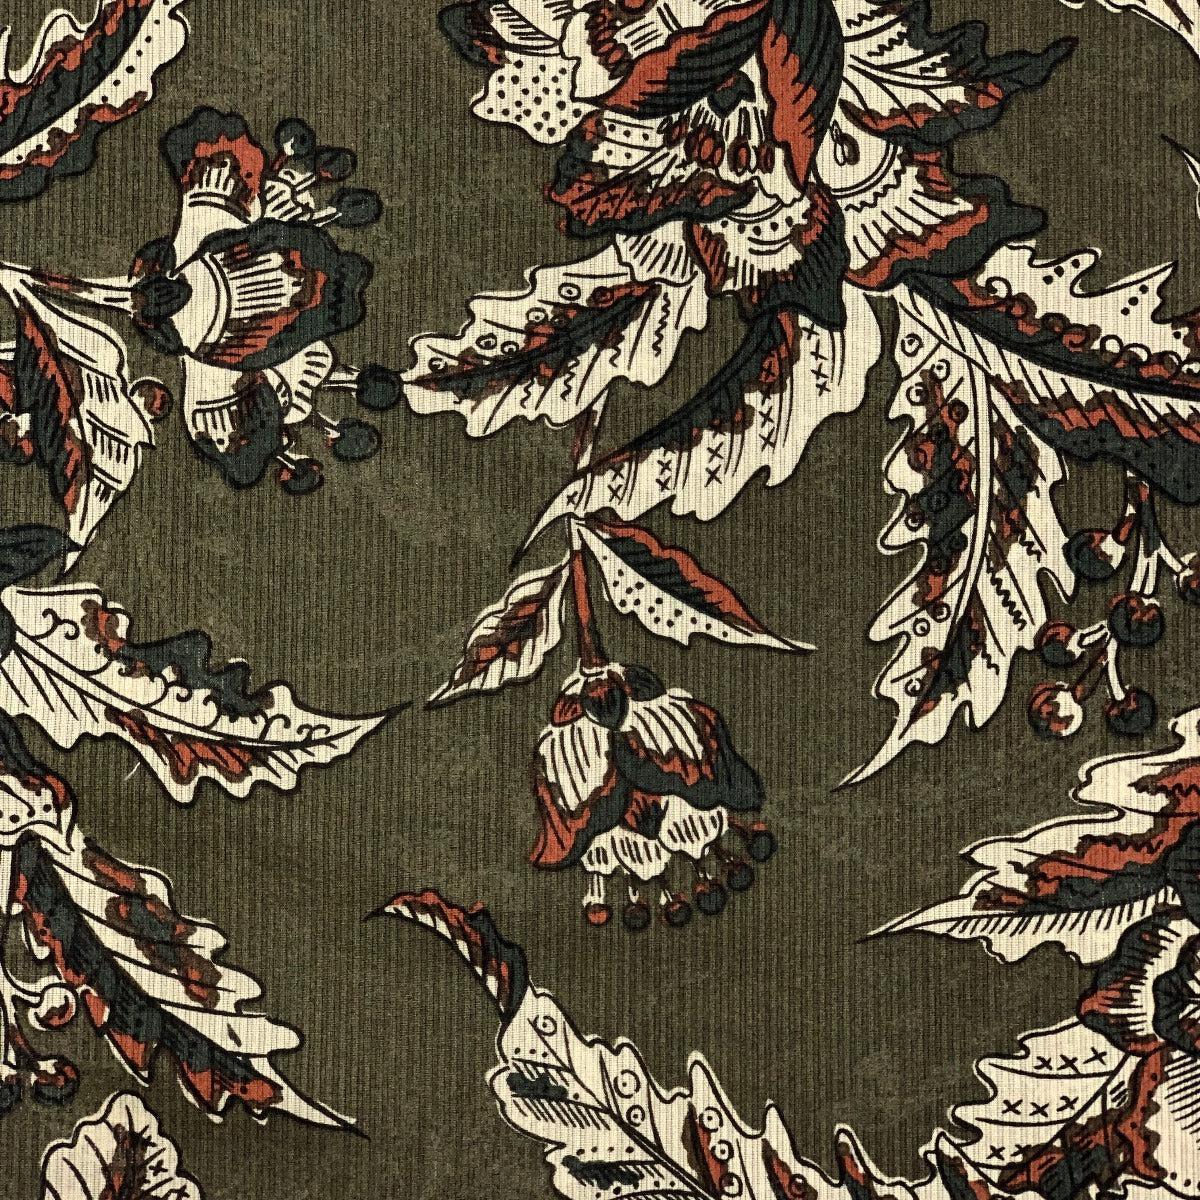 Kokka-Block Print Vines on Moss Green on Cotton Voile-fabric-gather here online